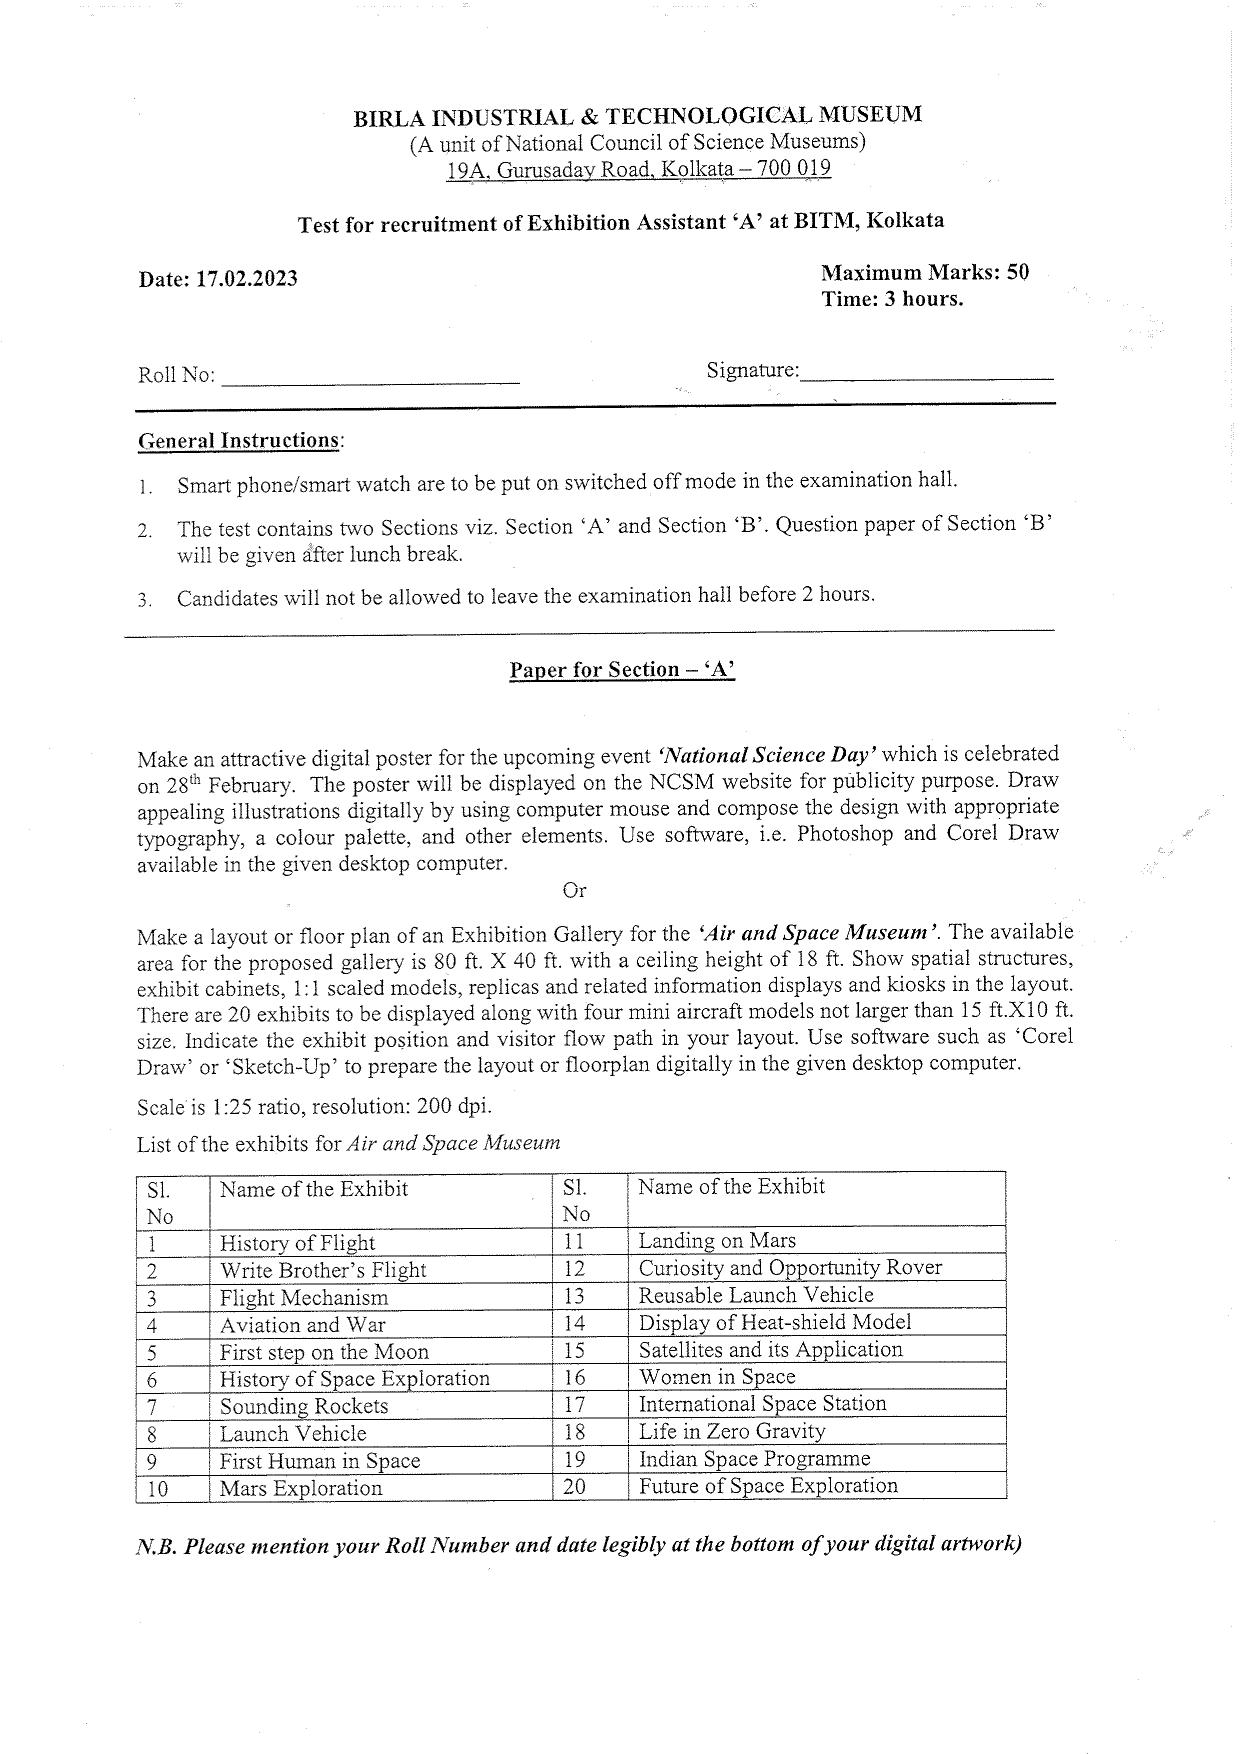 Question Paper of Exhibition Assistant ‘A’ - Page 1